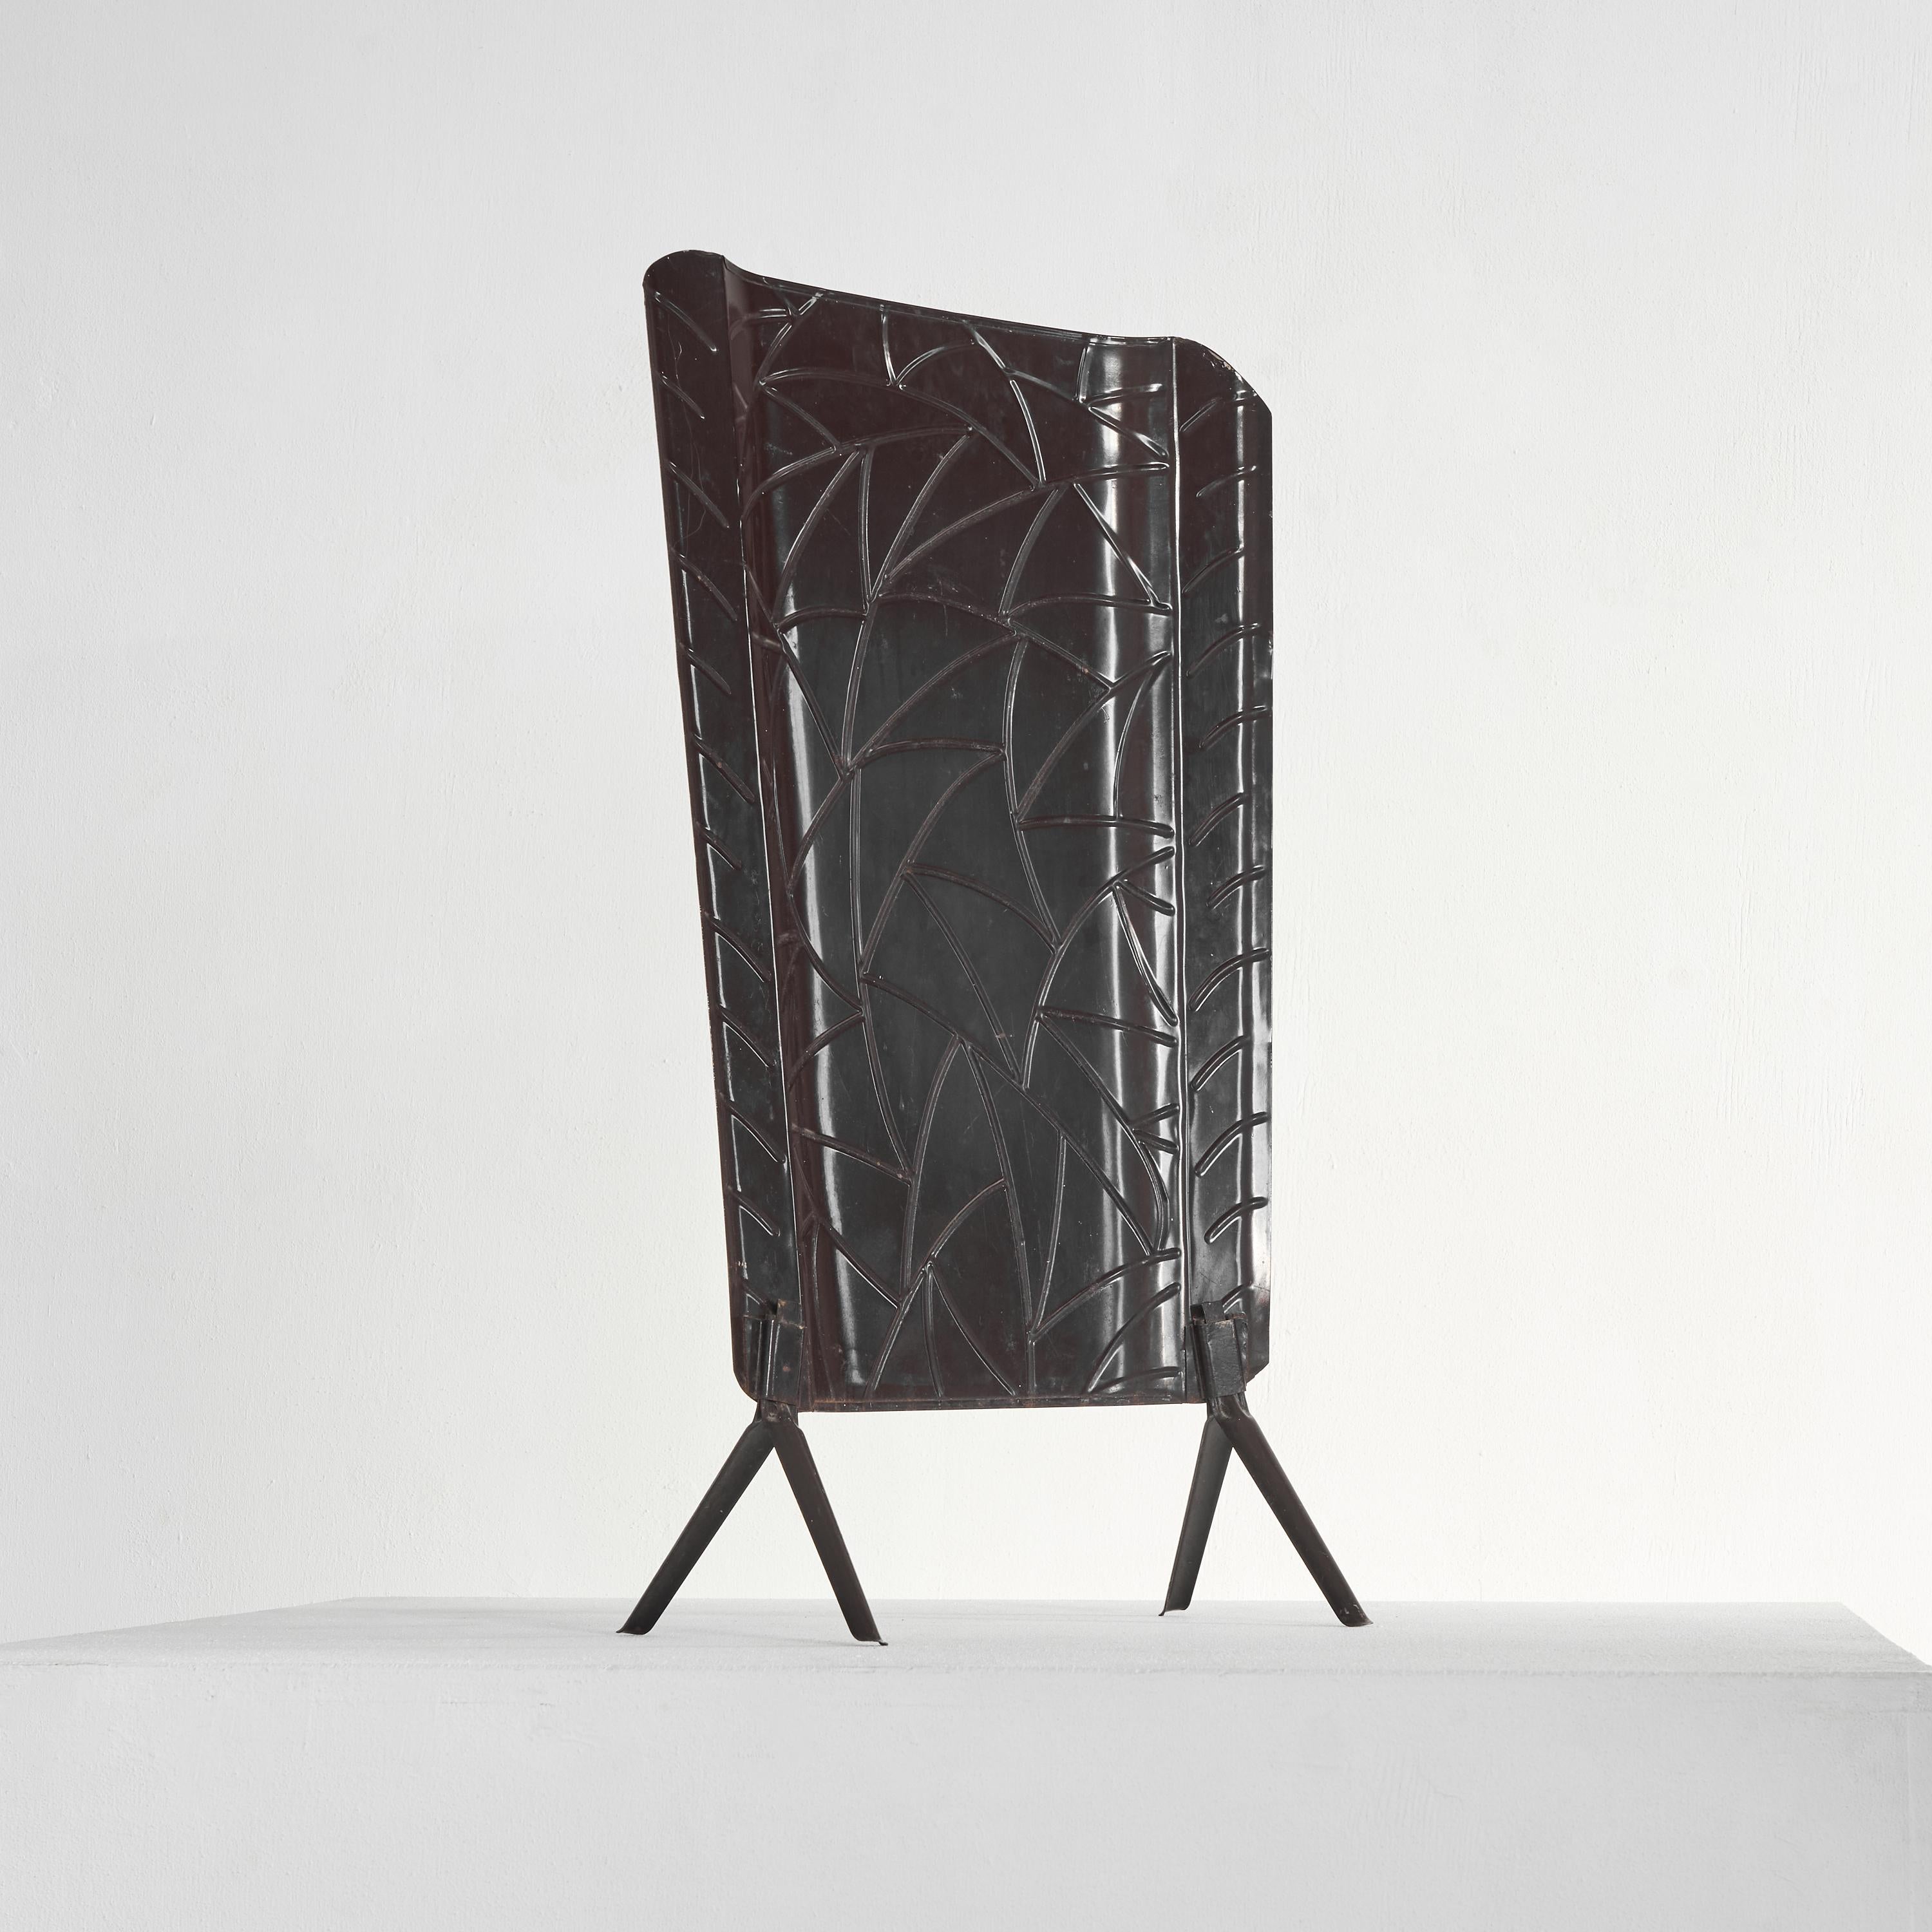 Hand-Crafted Art Deco Fire Screen in Tin 1940s For Sale